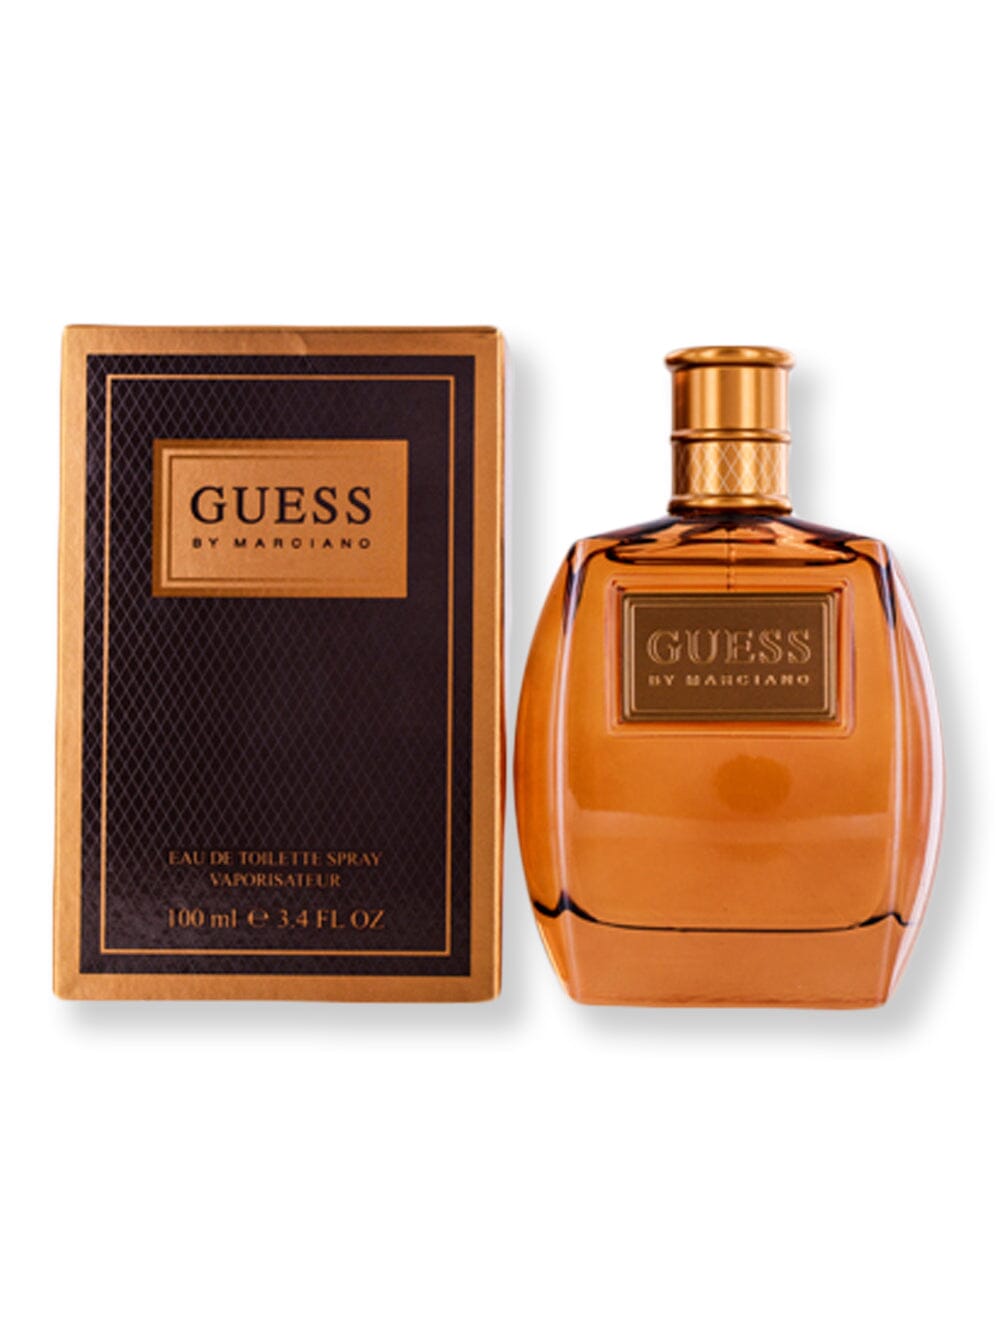 Guess Guess By Marciano EDT Spray 3.4 oz Perfume 